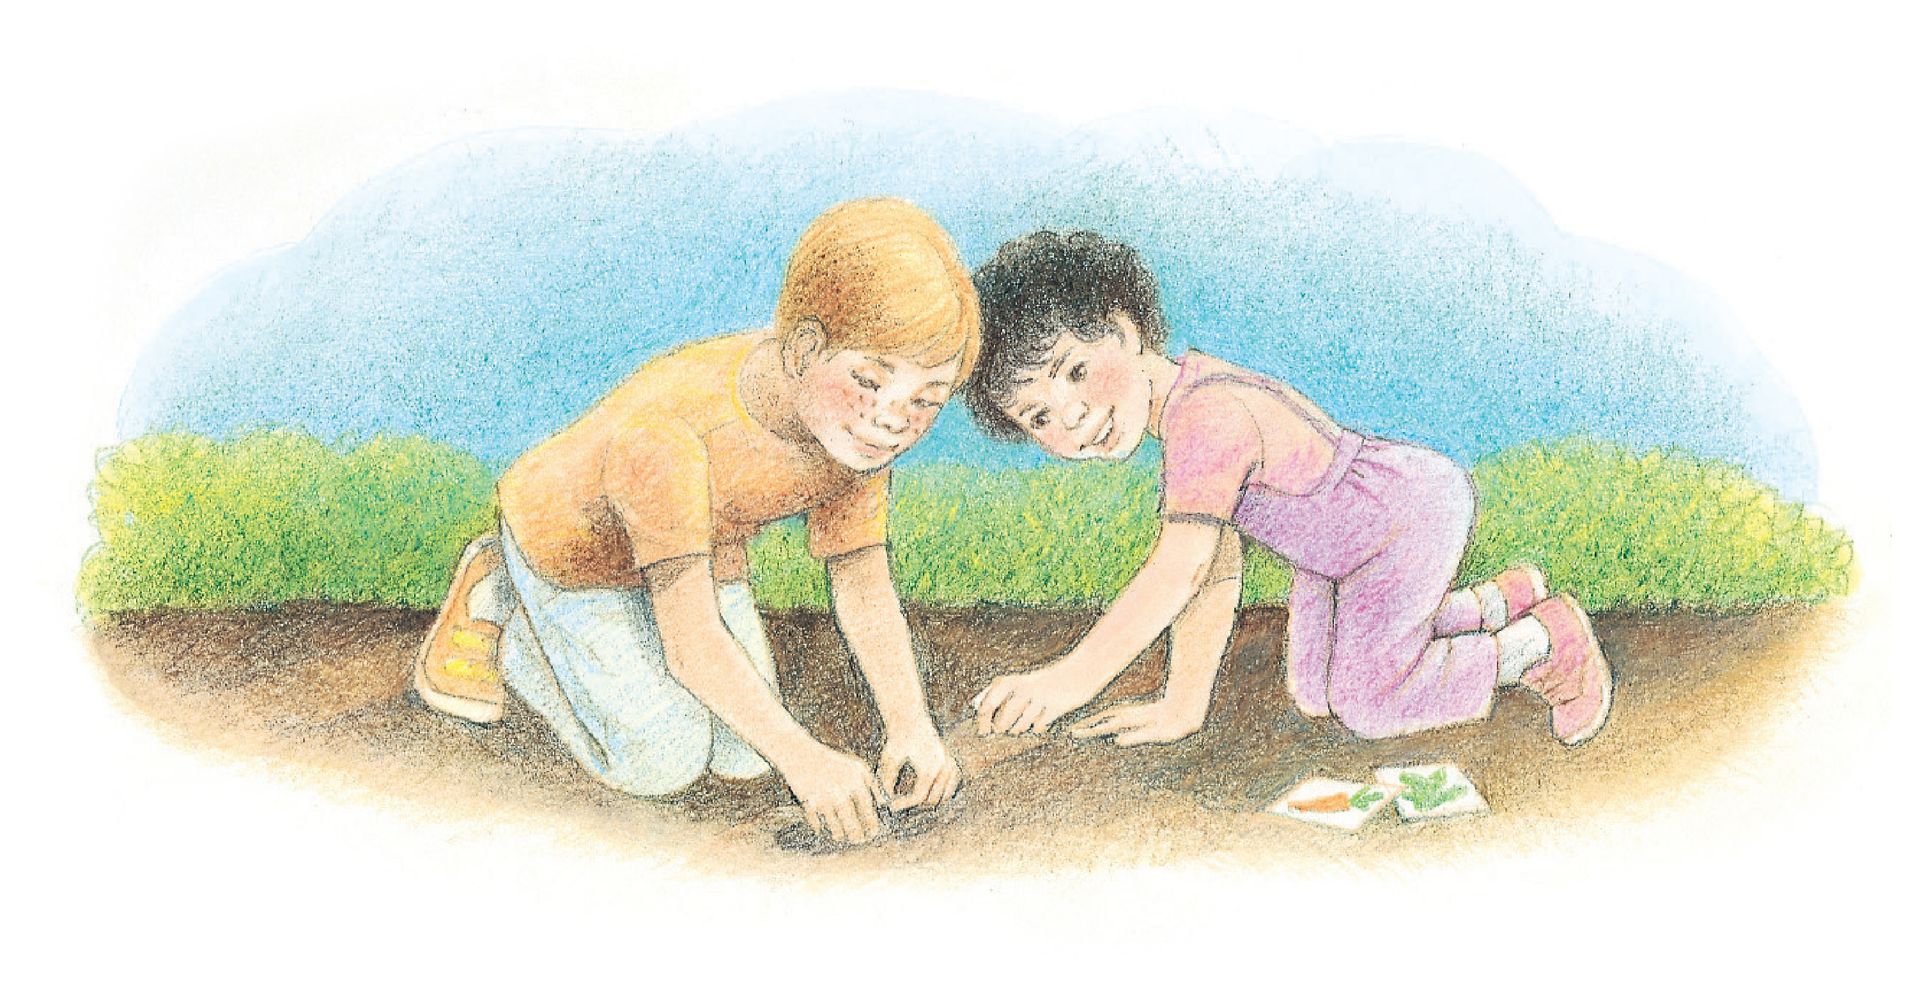 A boy and a girl planting seeds in a garden. From the Children’s Songbook, page 237, “The Prophet Said to Plant a Garden”; watercolor illustration by Virginia Sargent.